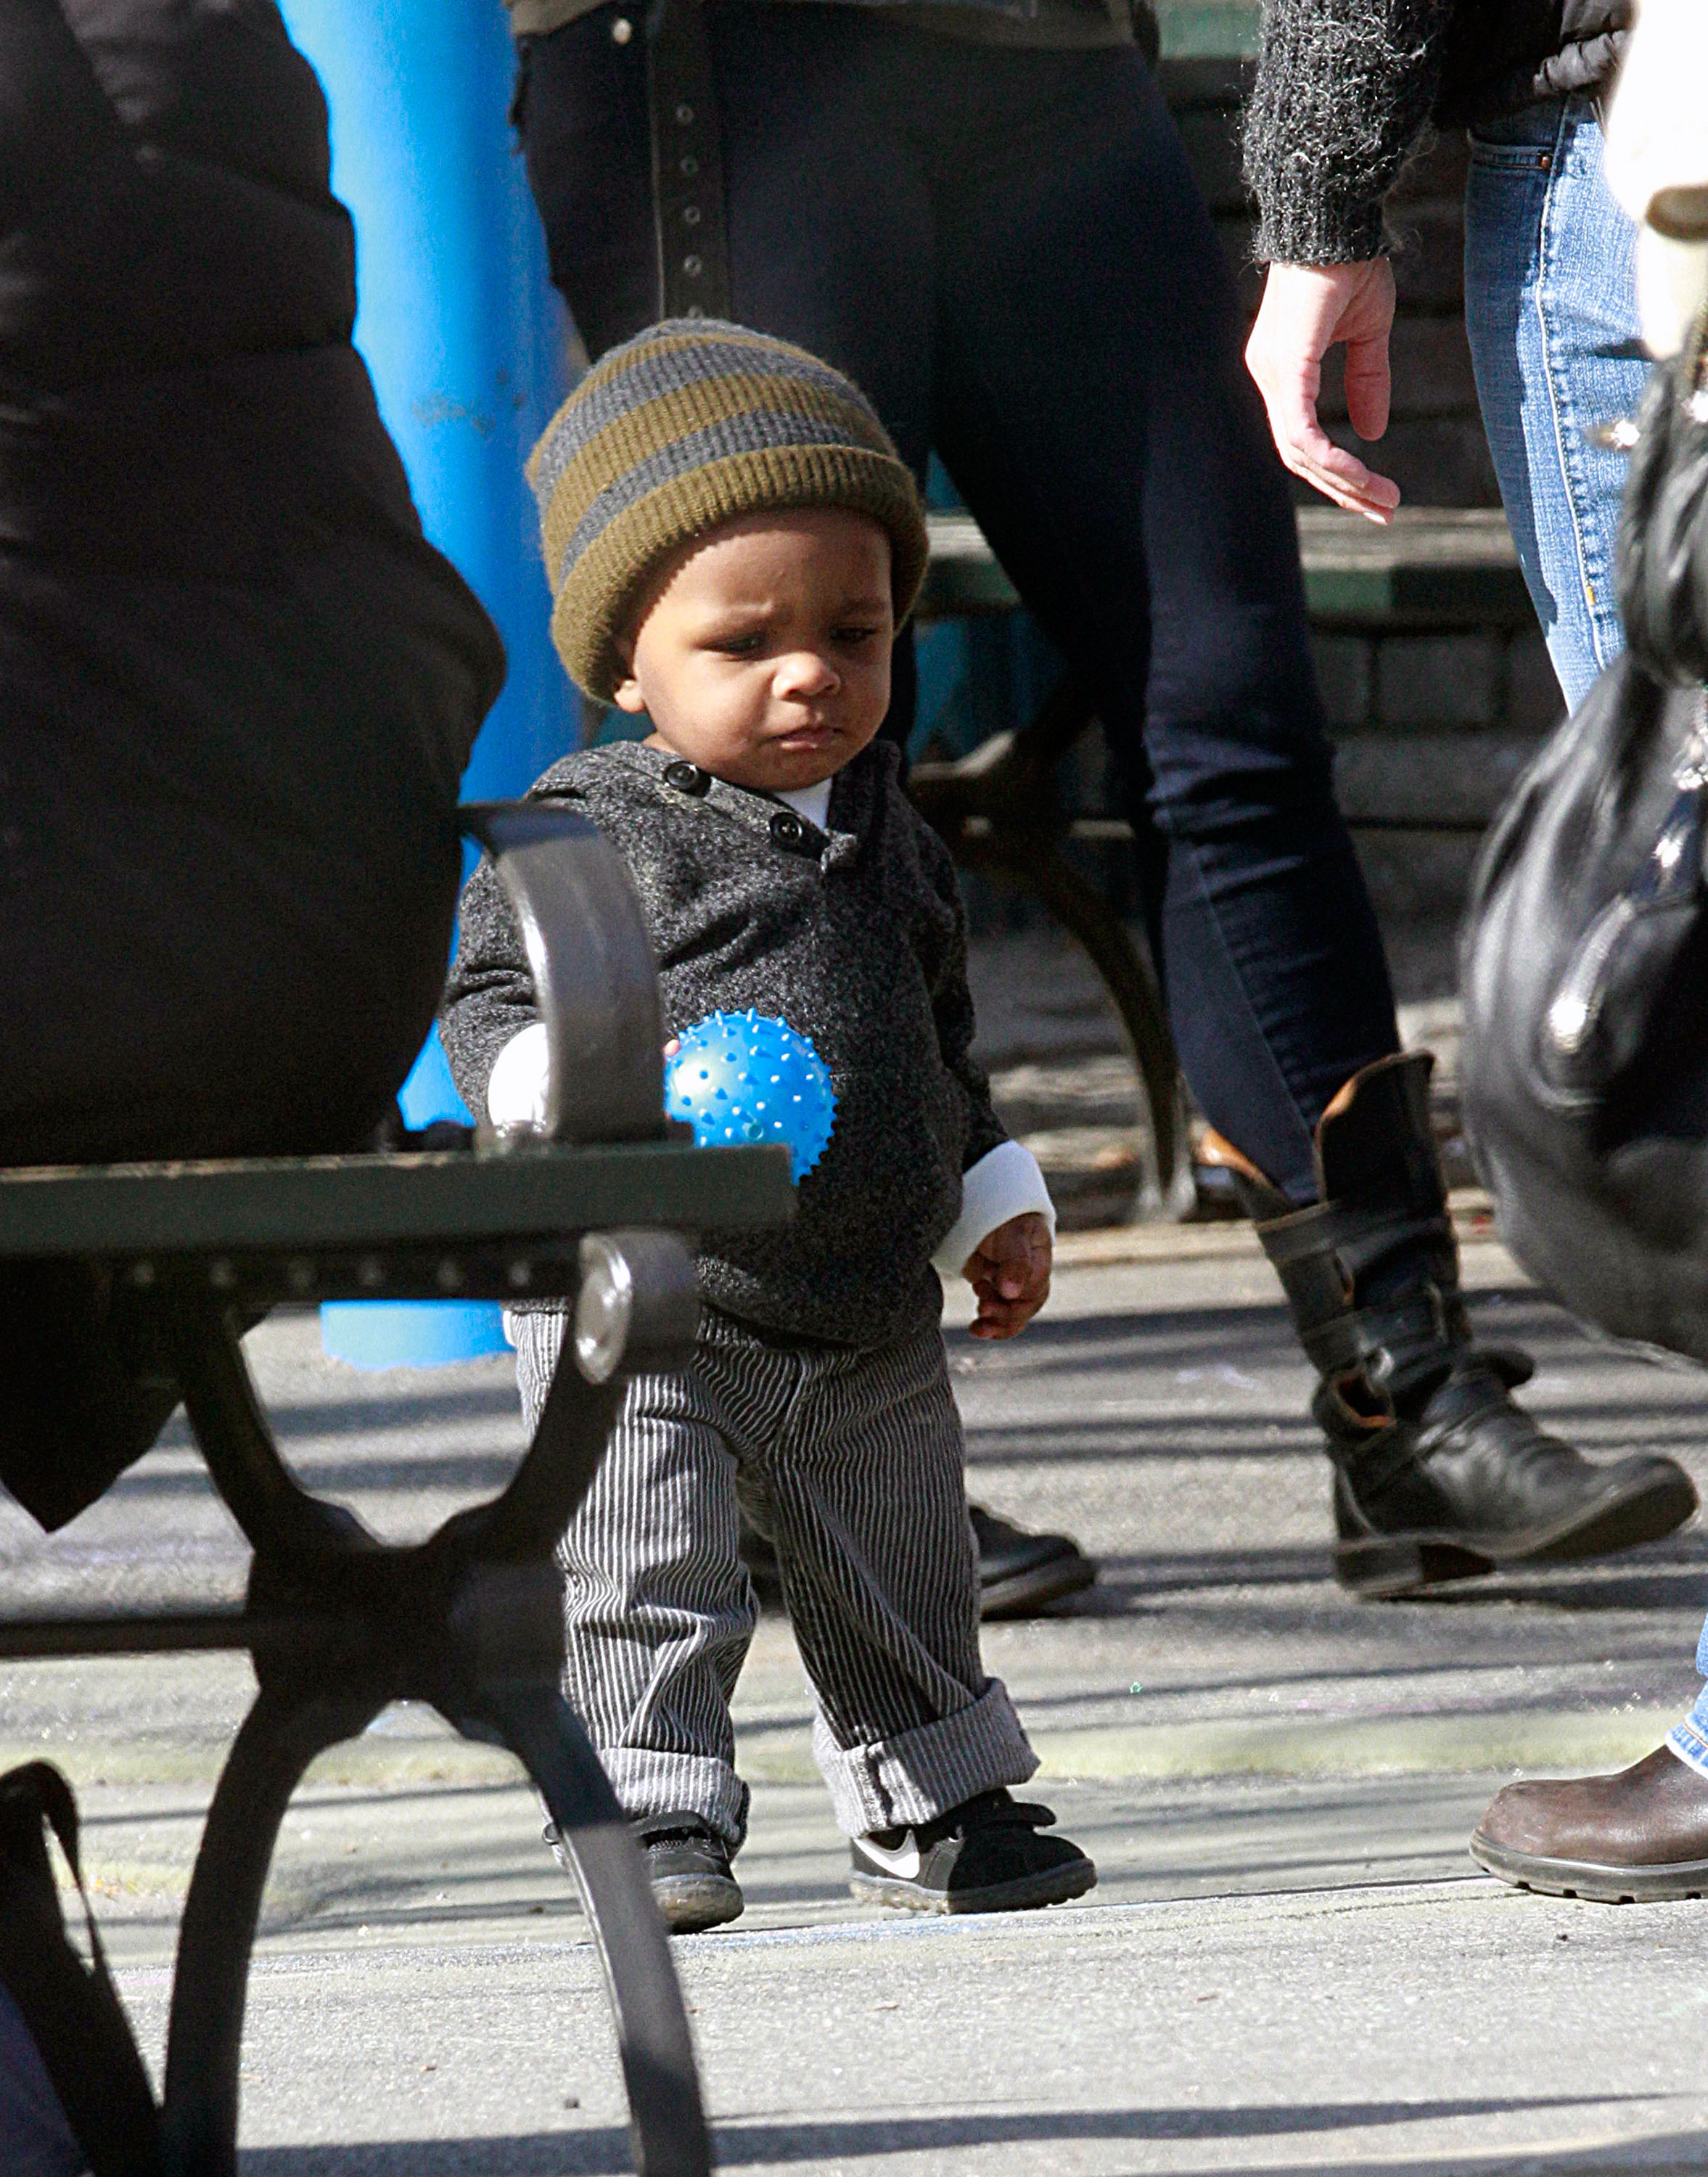 Sandra Bullock's son Louis Bullock is seen on the streets of Manhattan in New York City, on March 20, 2011. | Source: Getty Images